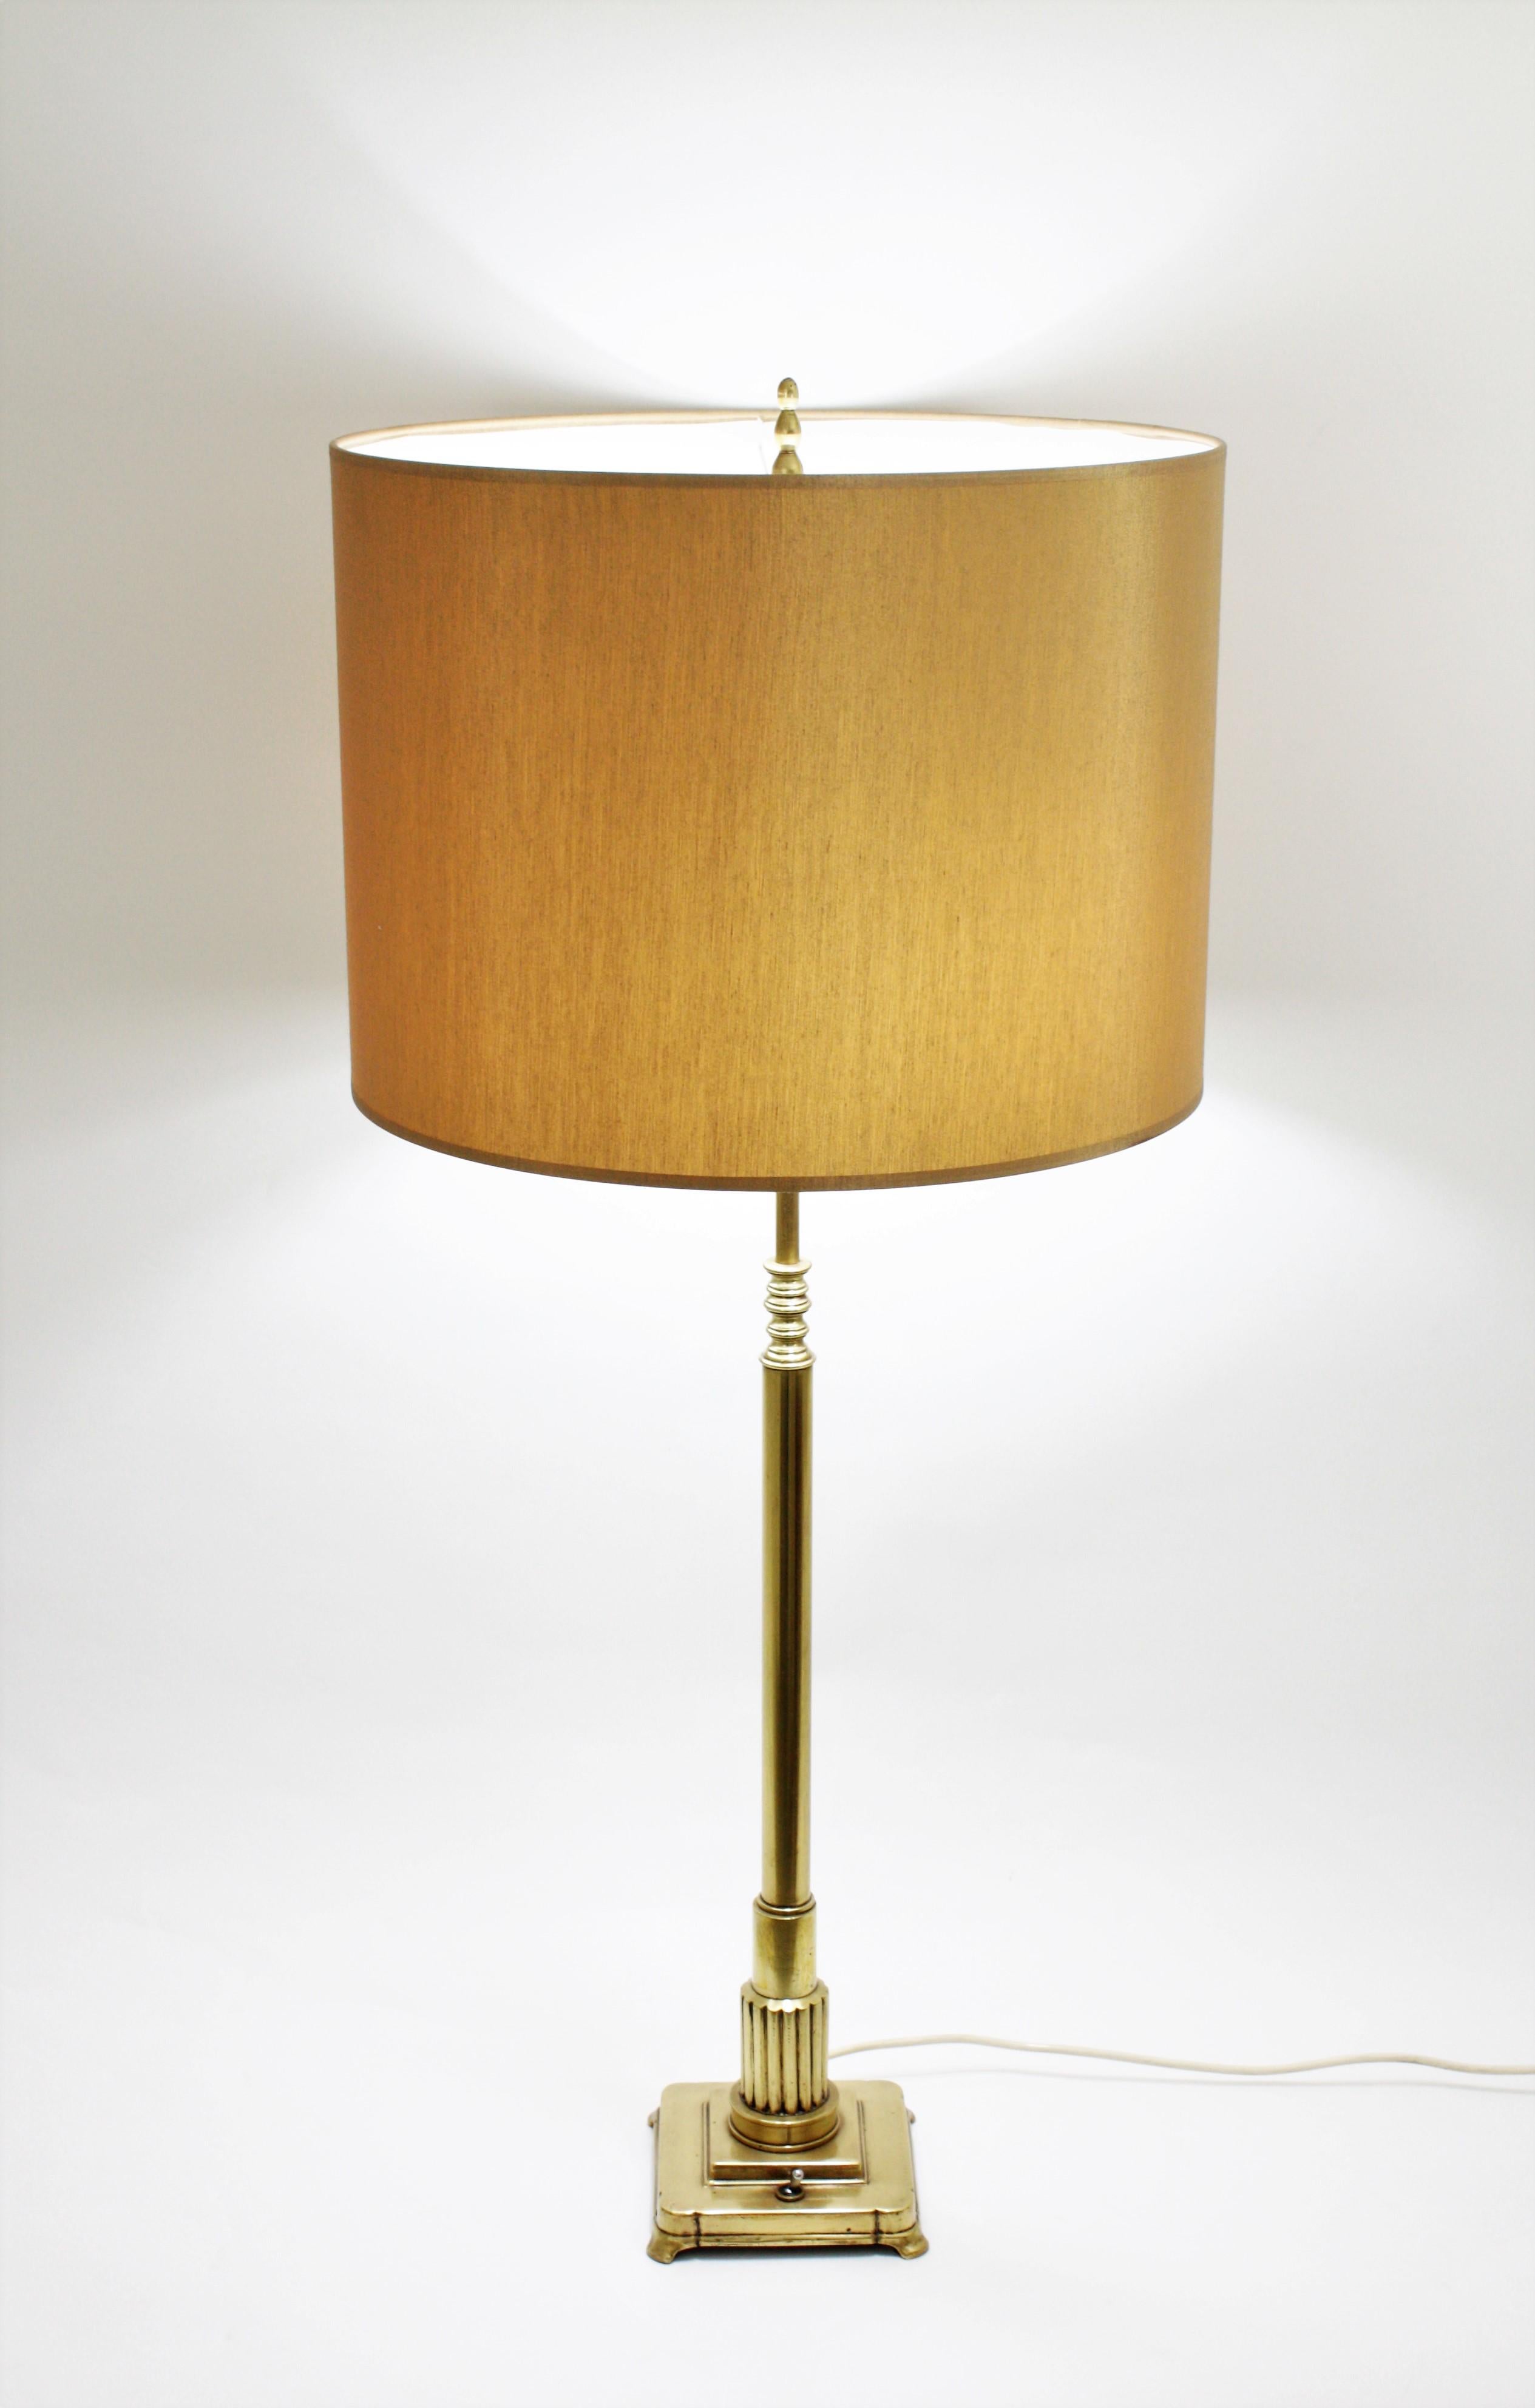 French Art Deco Column Table Lamp in Polished Brass For Sale 1